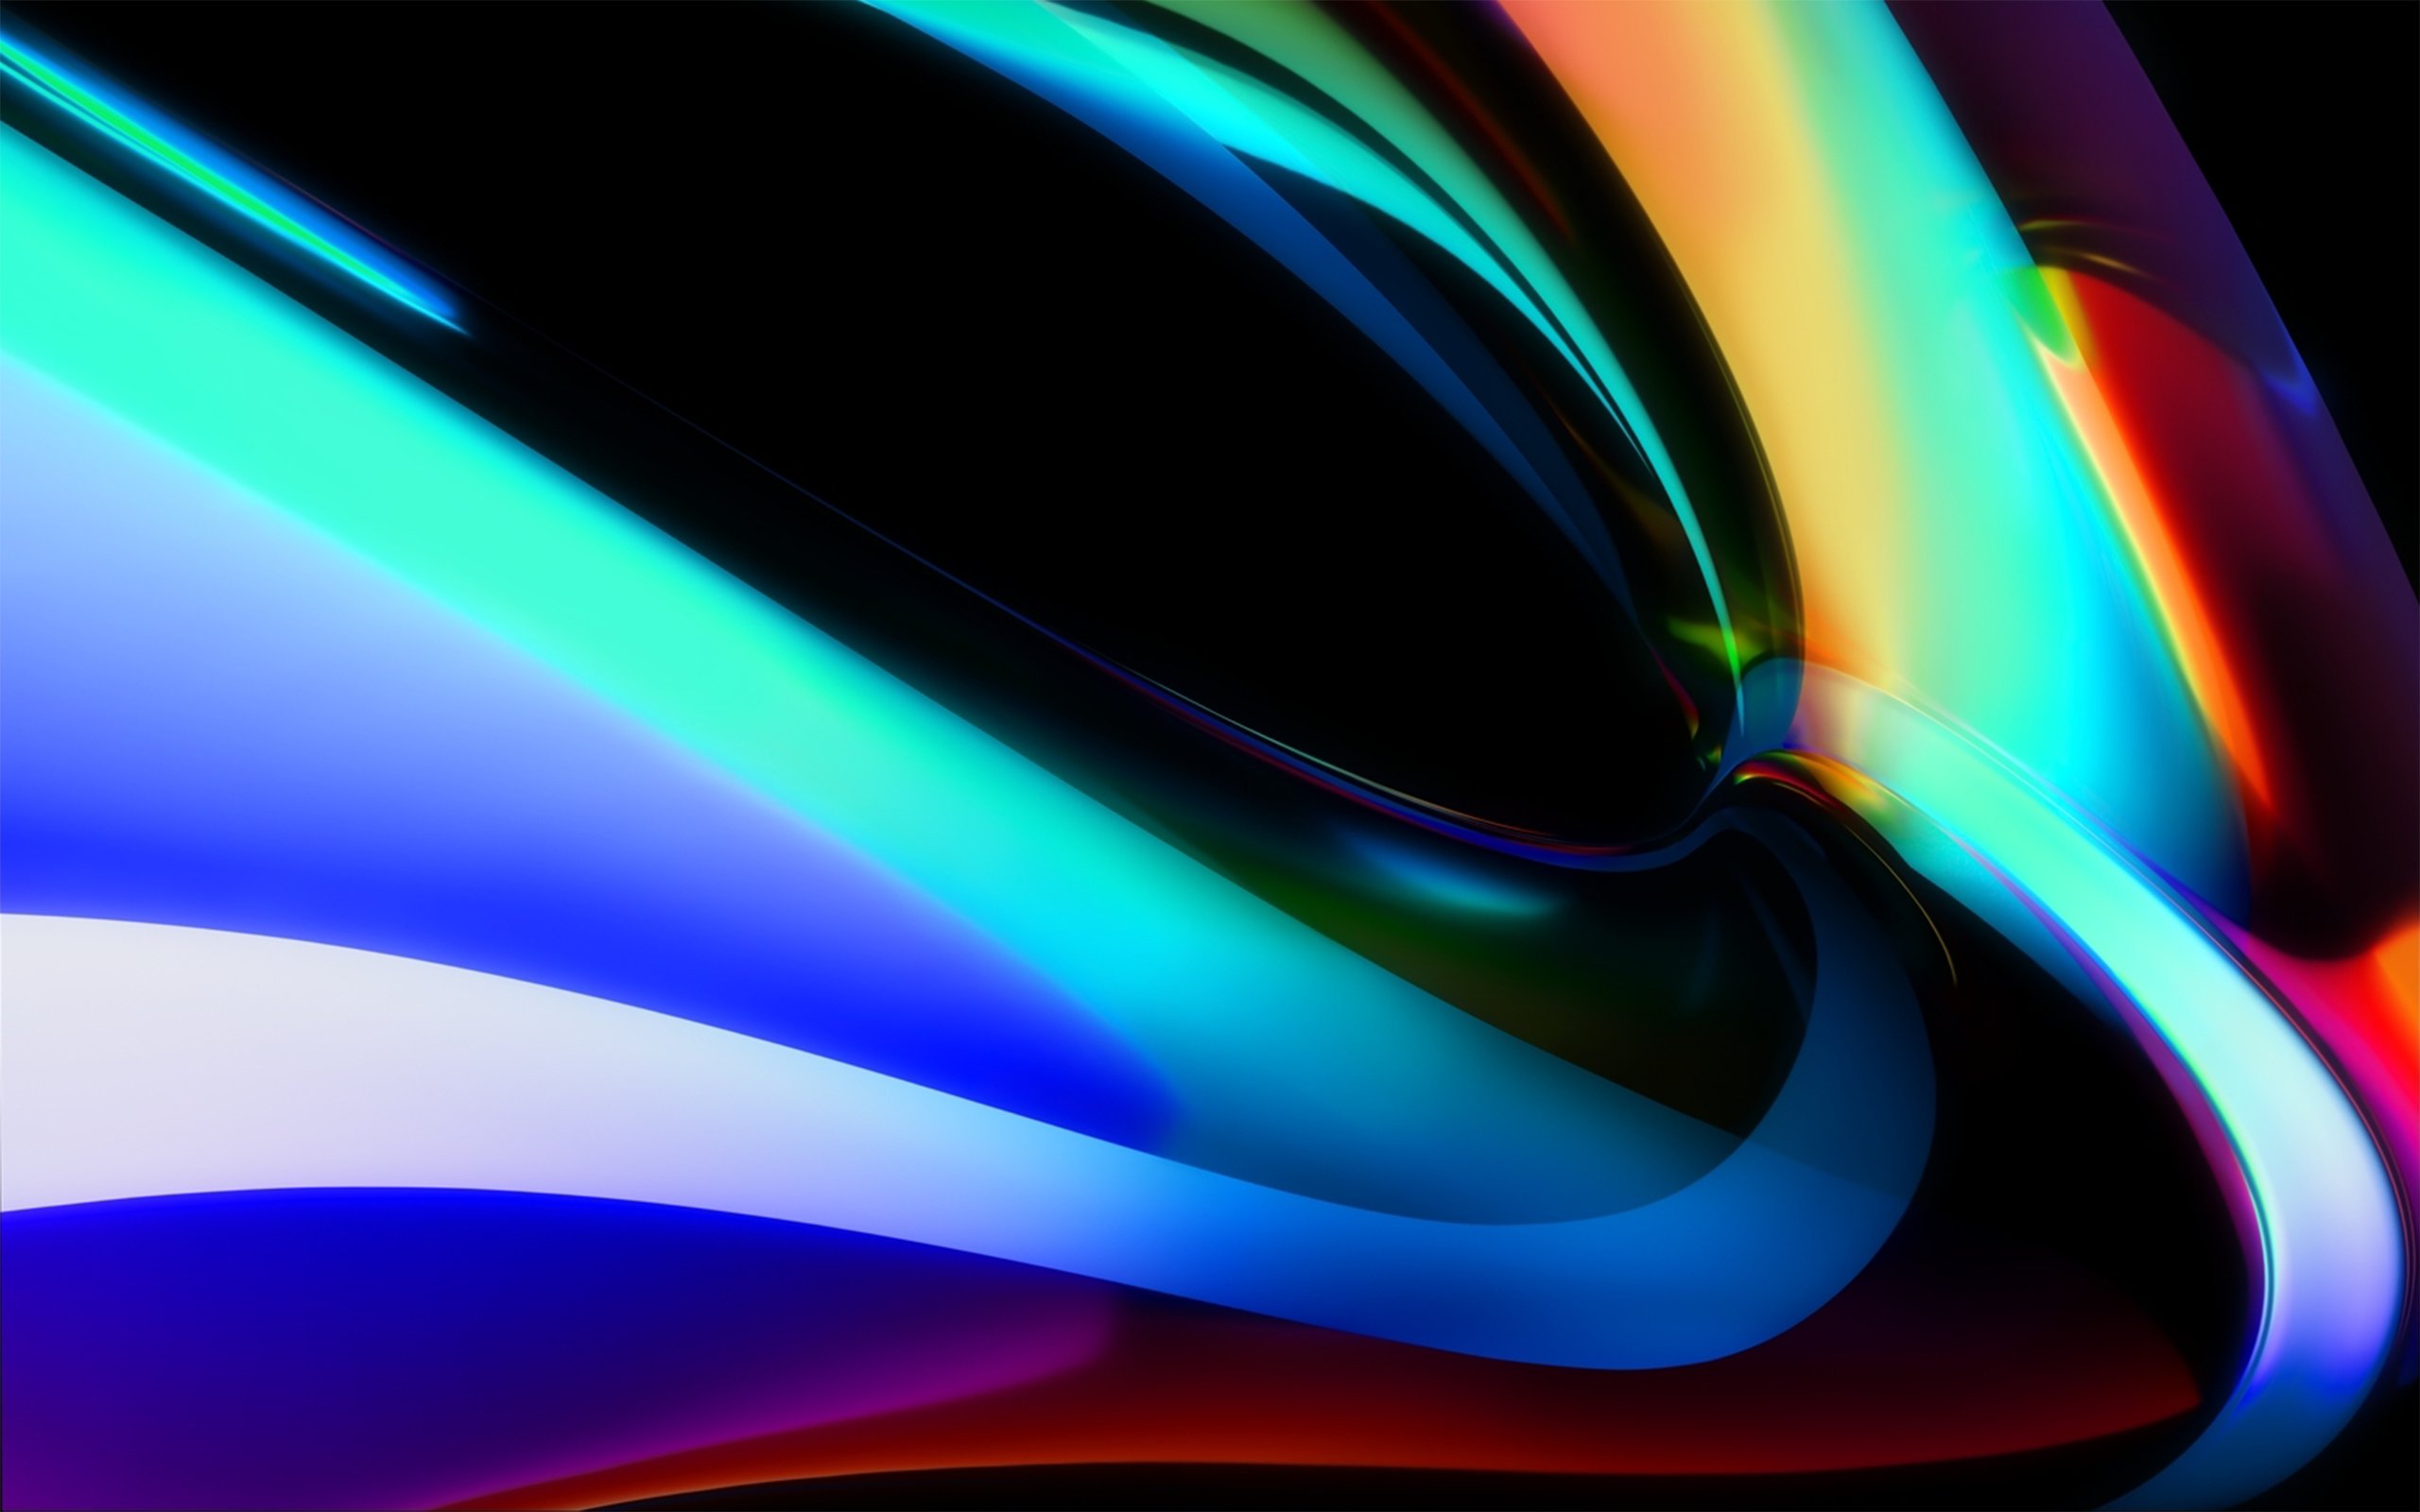 MacBook Pro Wallpaper 4K, Colorful, Apple, Stock, Abstract, #1391